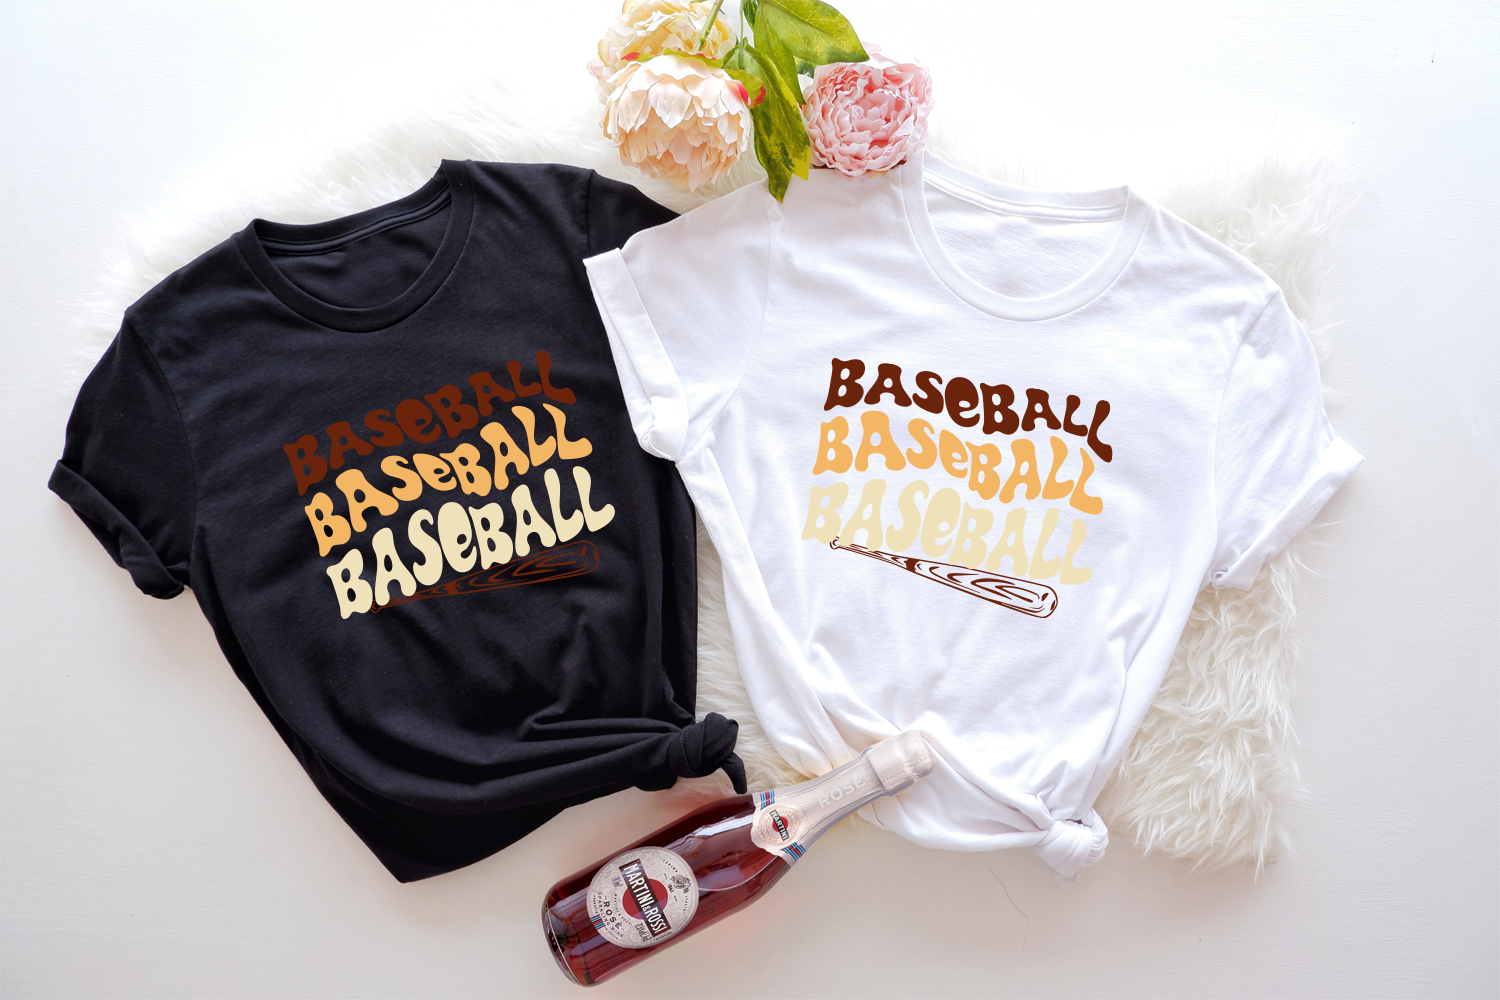 "Show your love for the game with this stylish and comfortable baseball t-shirt."